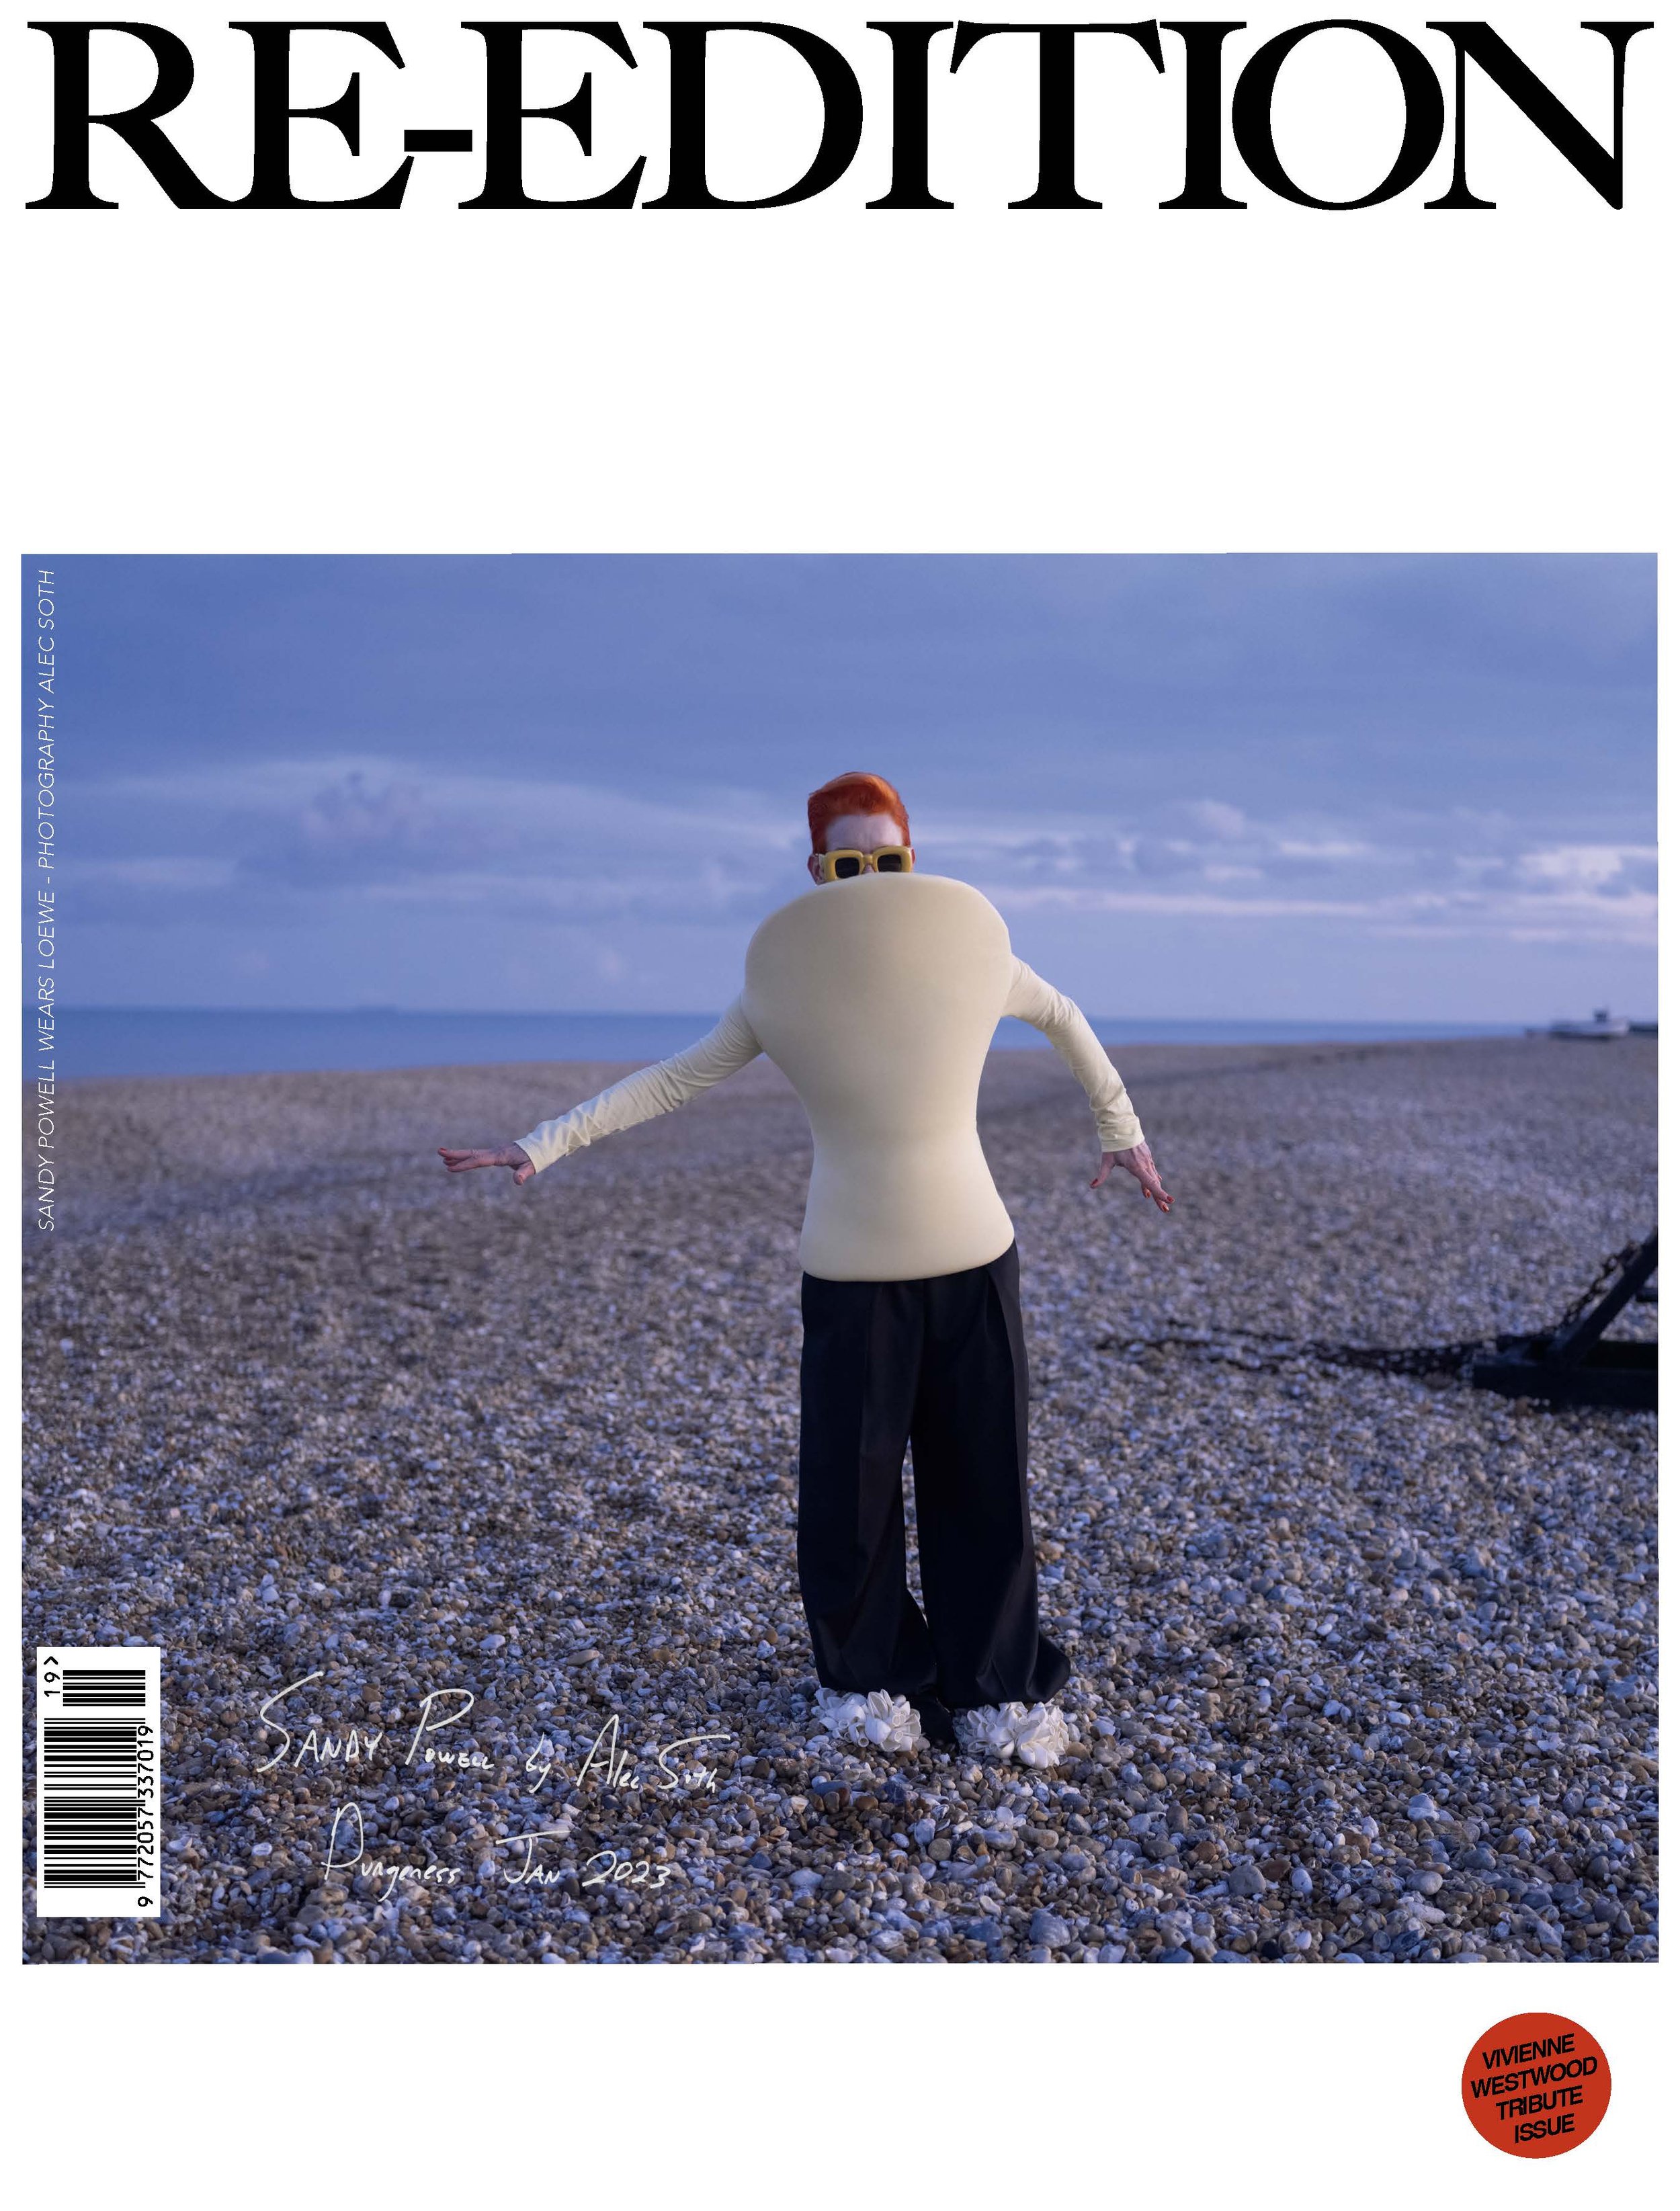 SANDY POWELL ALEC SOTH RE-EDITION DEAN MAYO DAVIES COVER 04.jpg